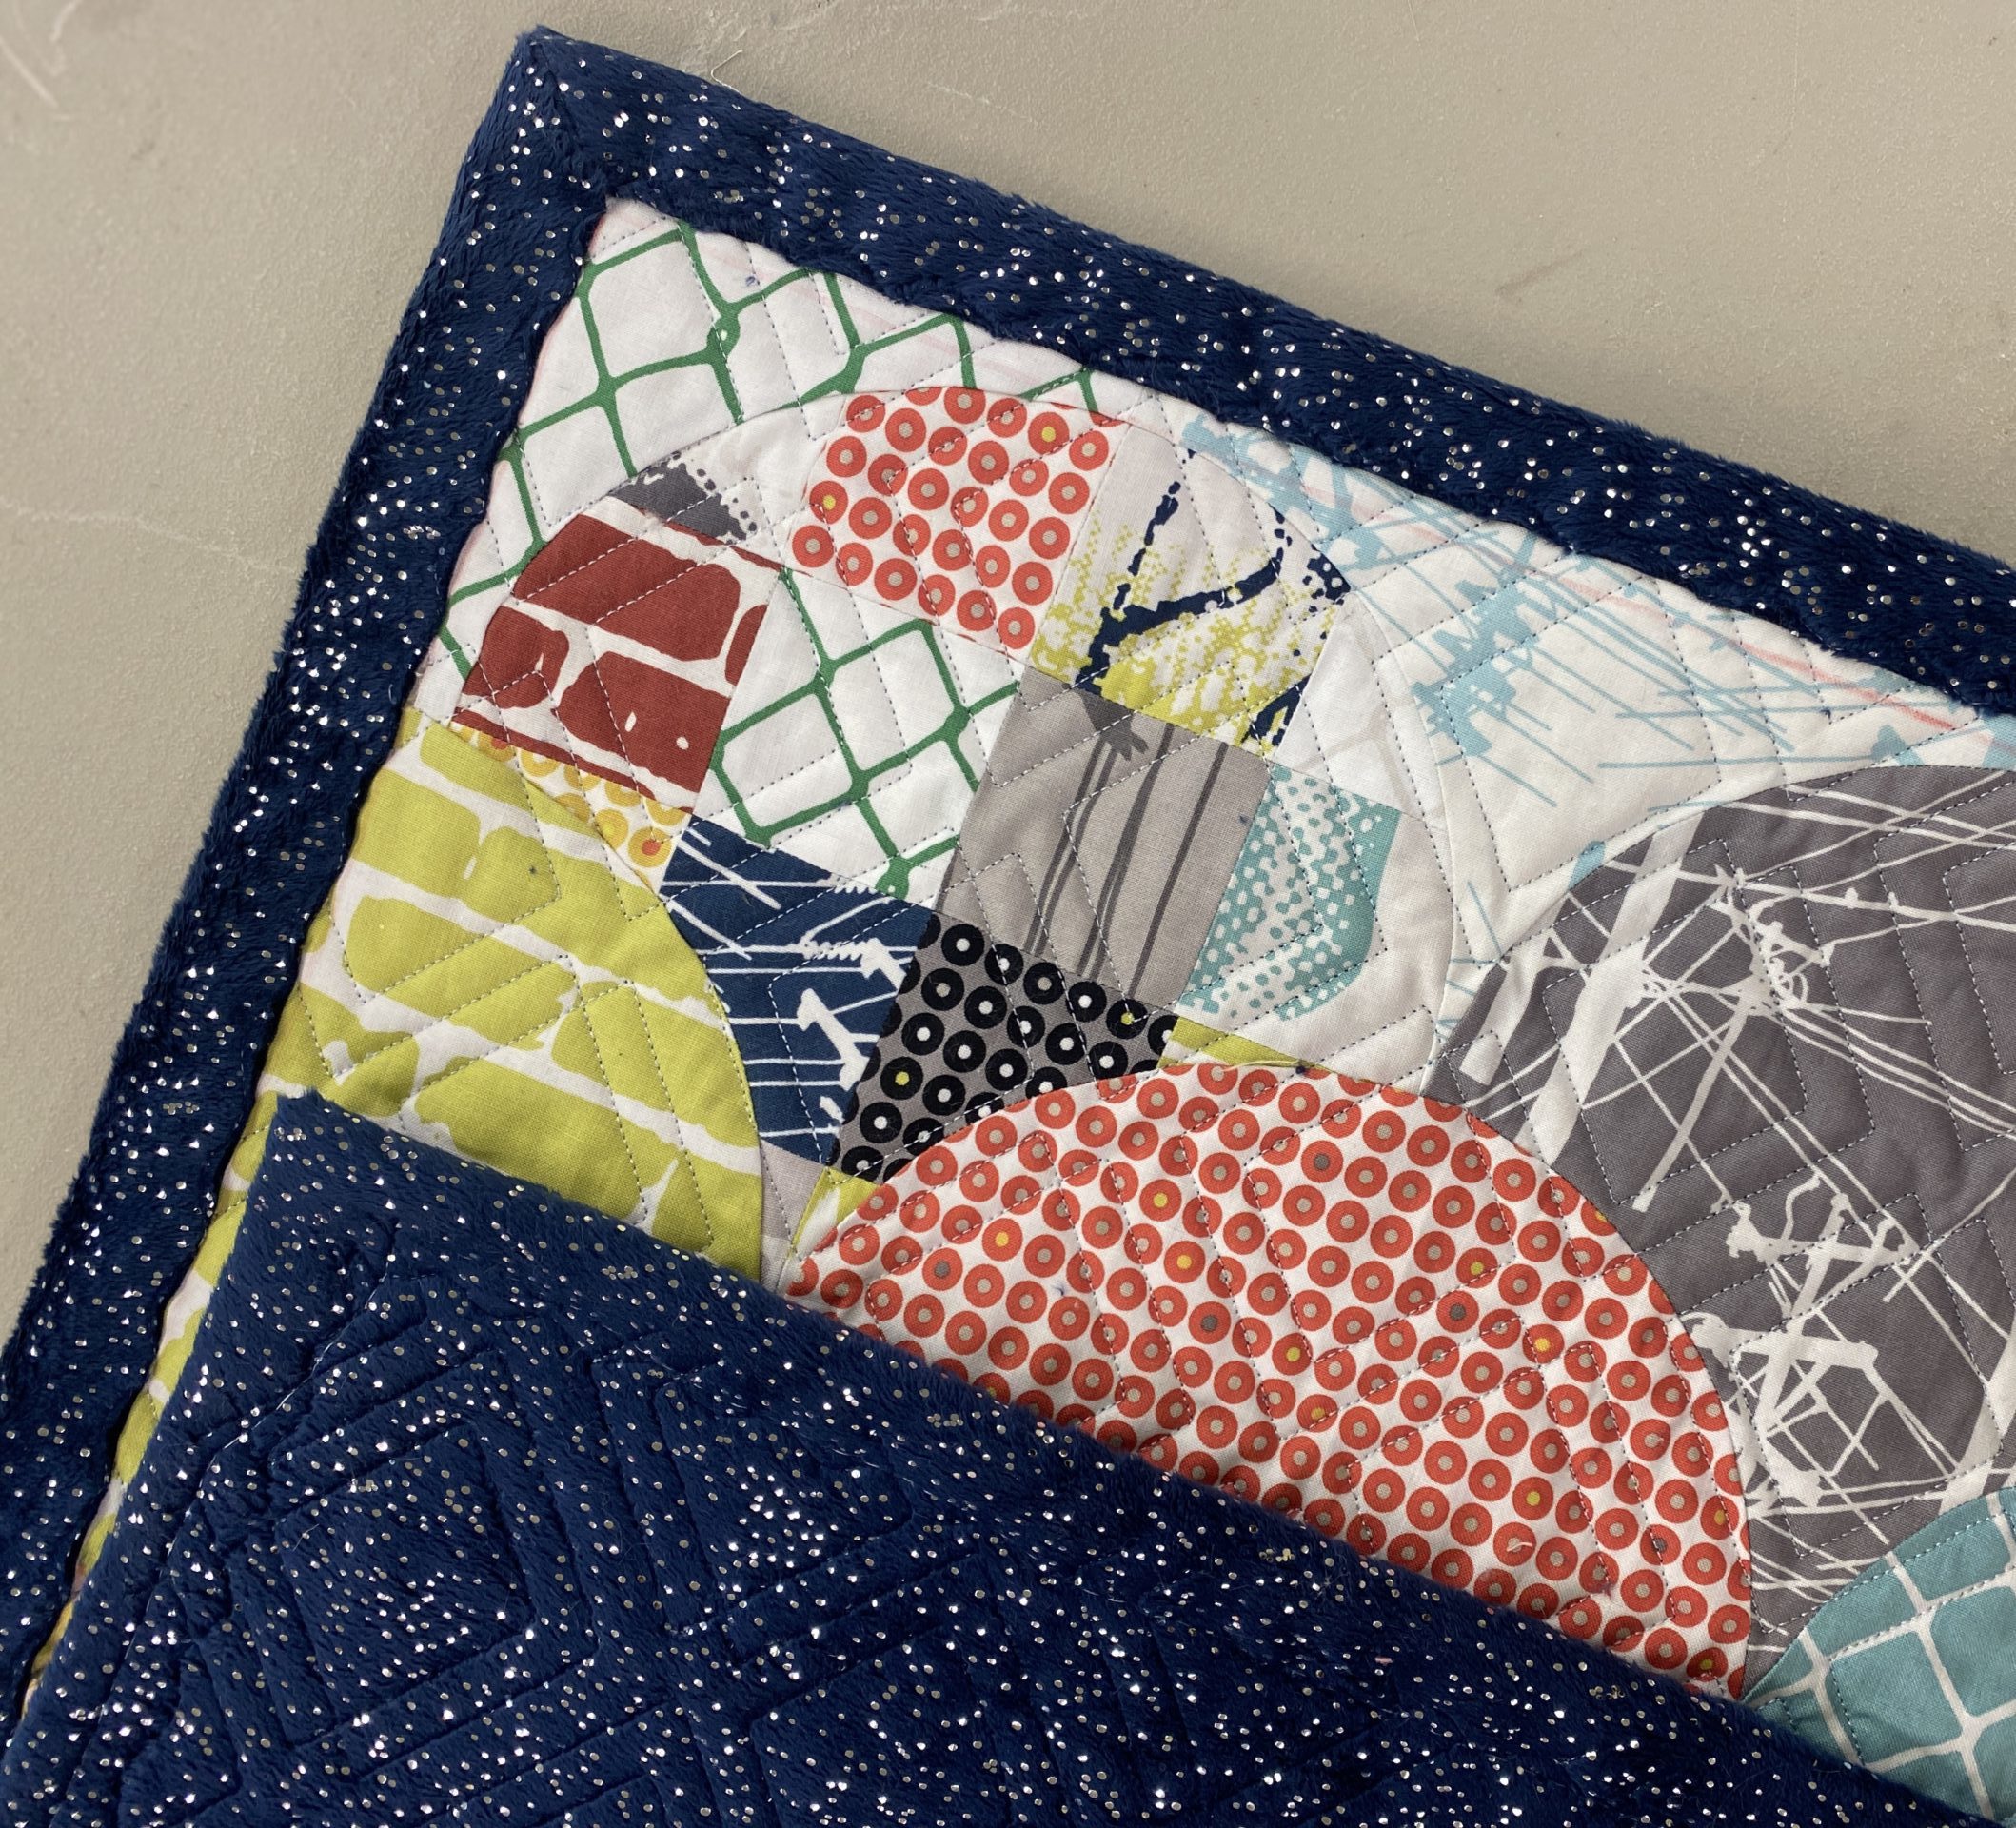 How to use Minky fabric for Quilt Backing 